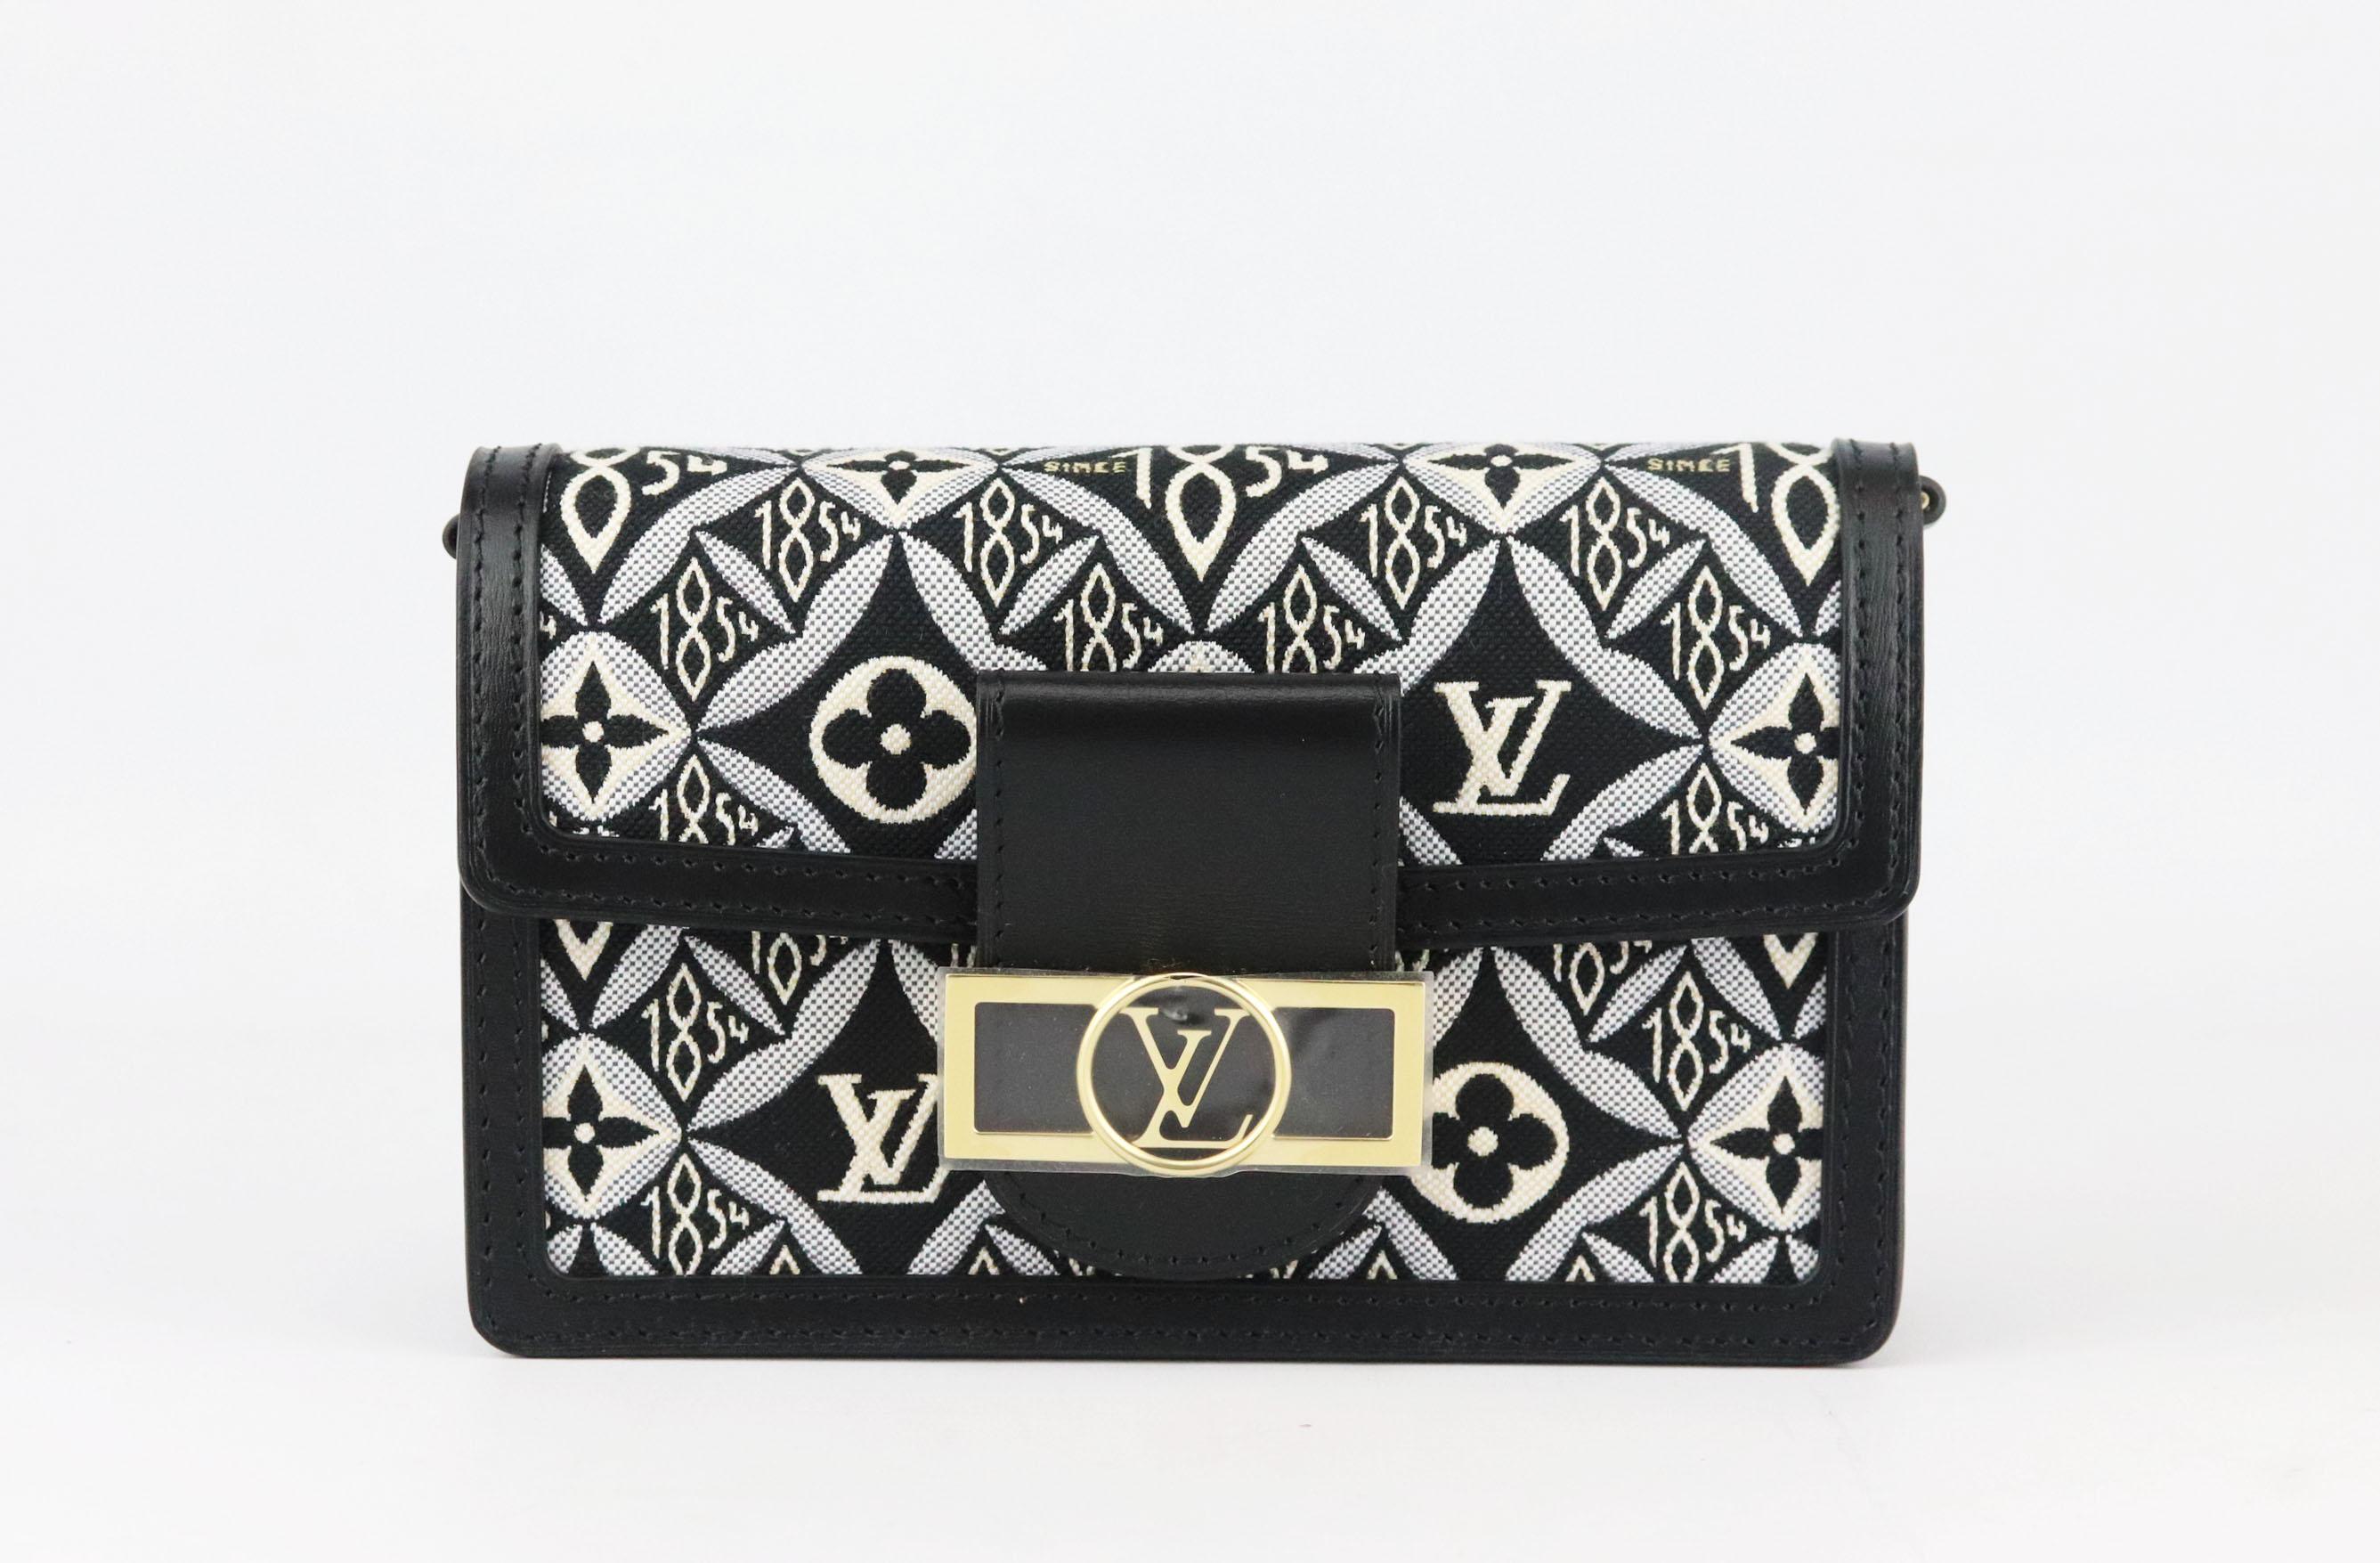 lv book chain wallet